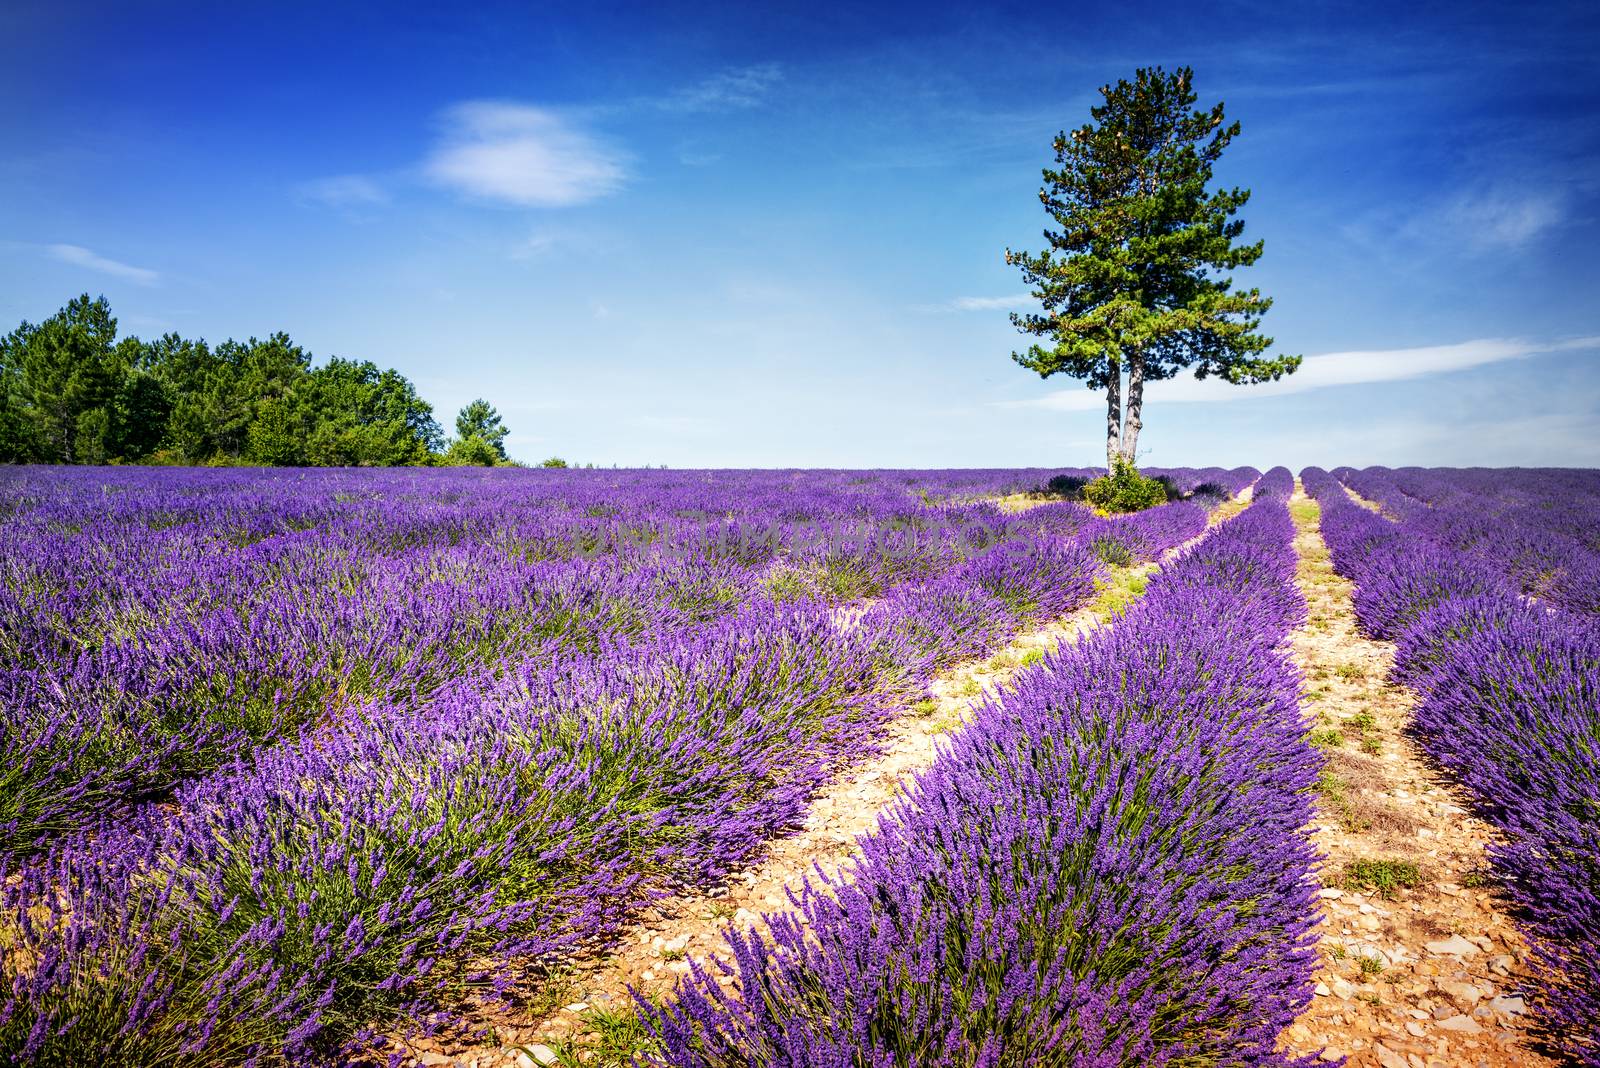 Lavender field in Provence, near Sault, France 